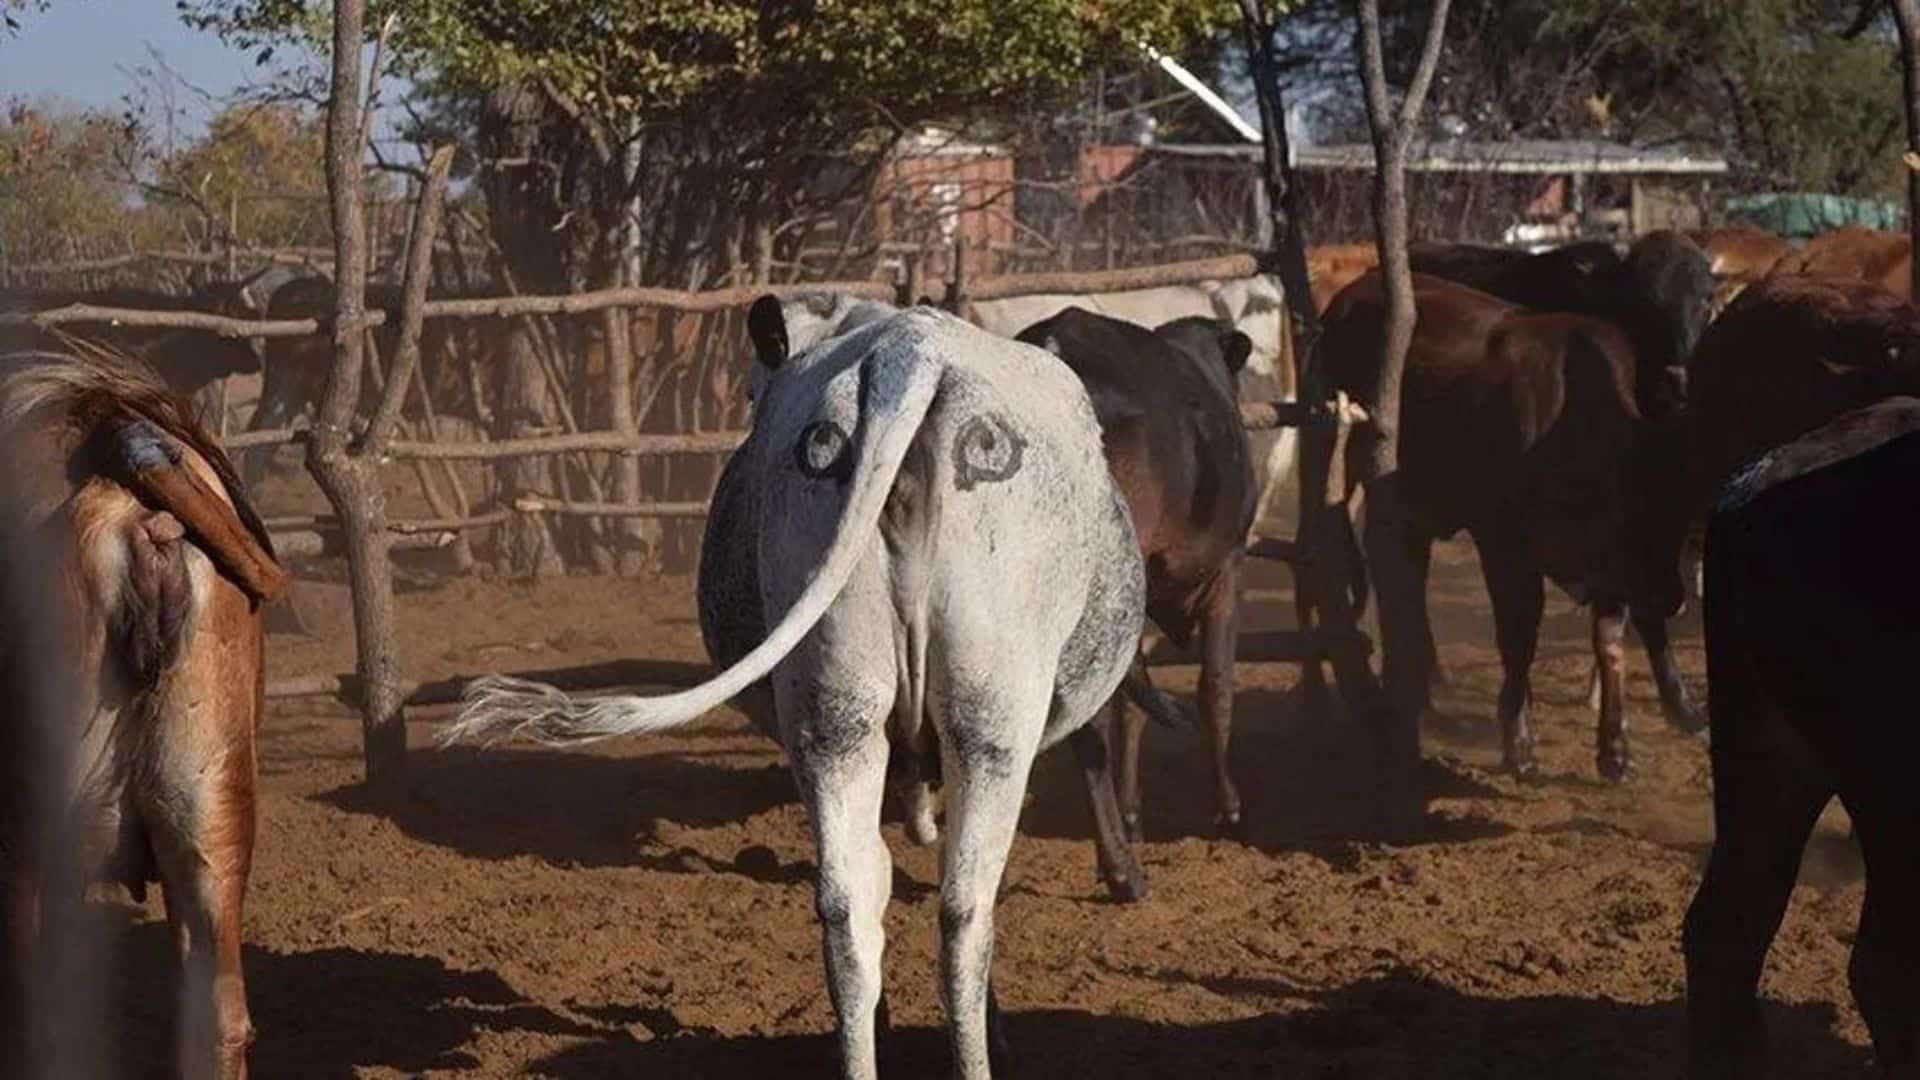 painting eyes on the butts of cows